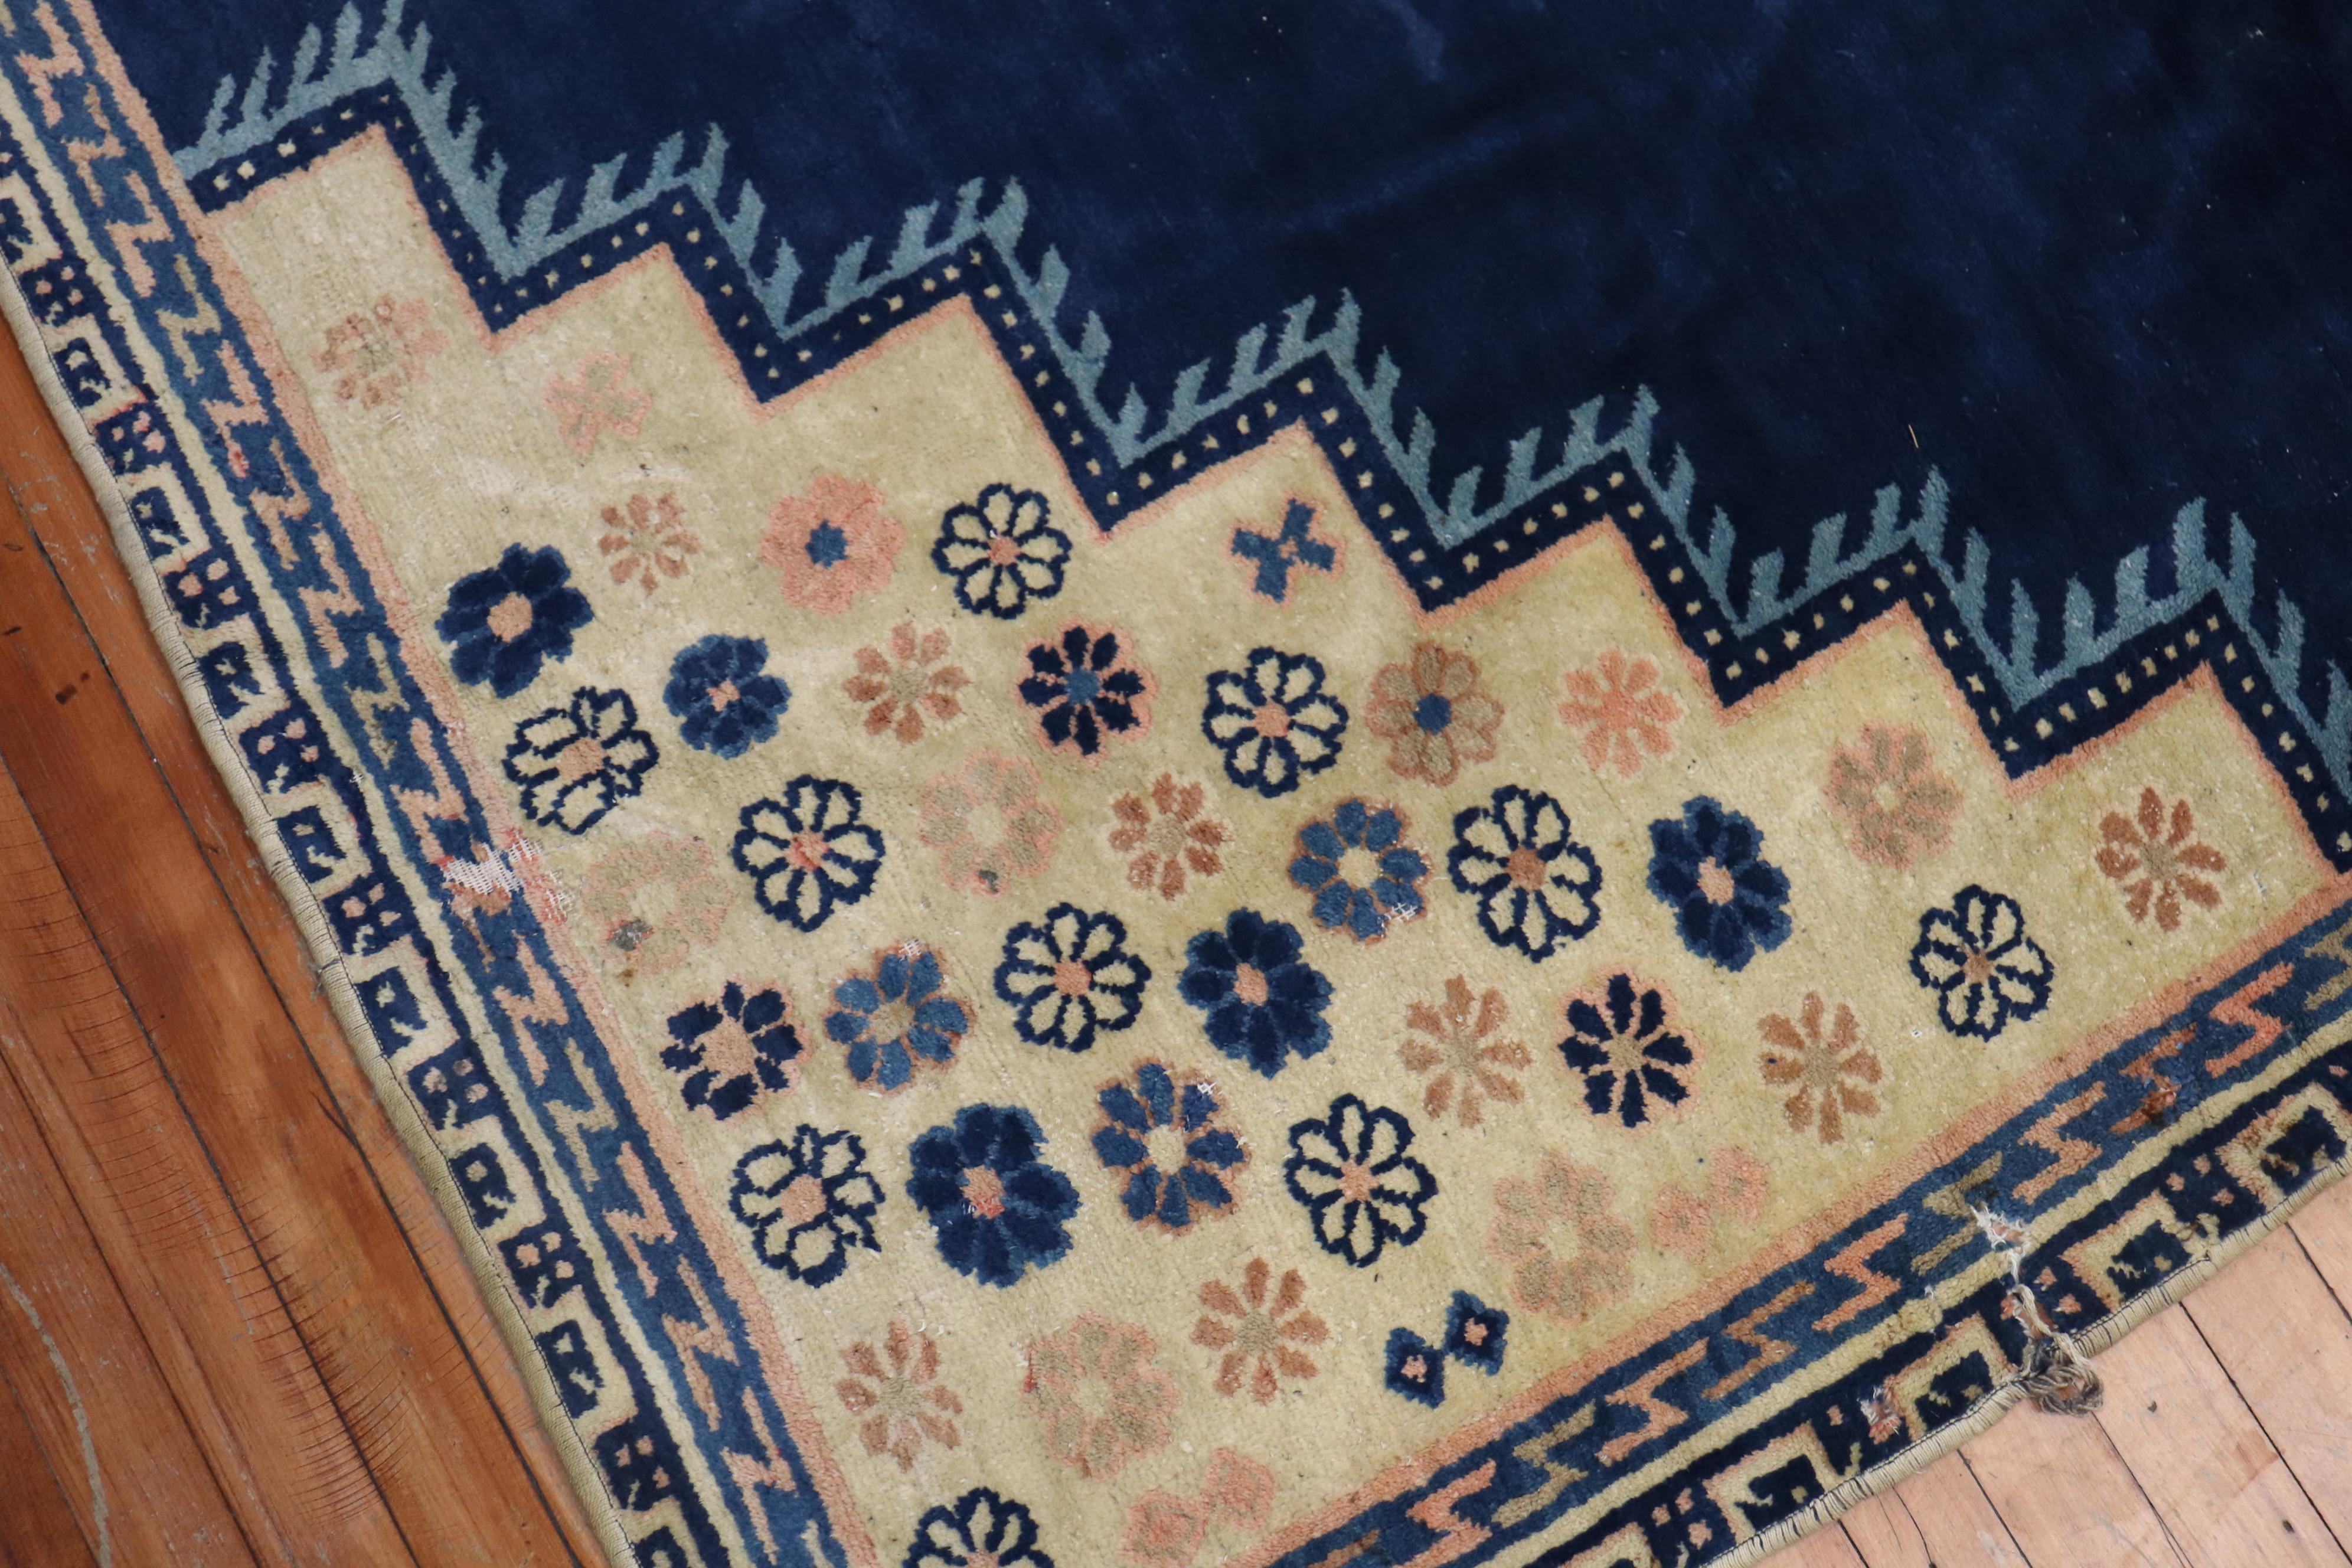 an early 20th century worn Chinese antique oversize one of a kind rug

Measures: 10'9' x 15'4''.